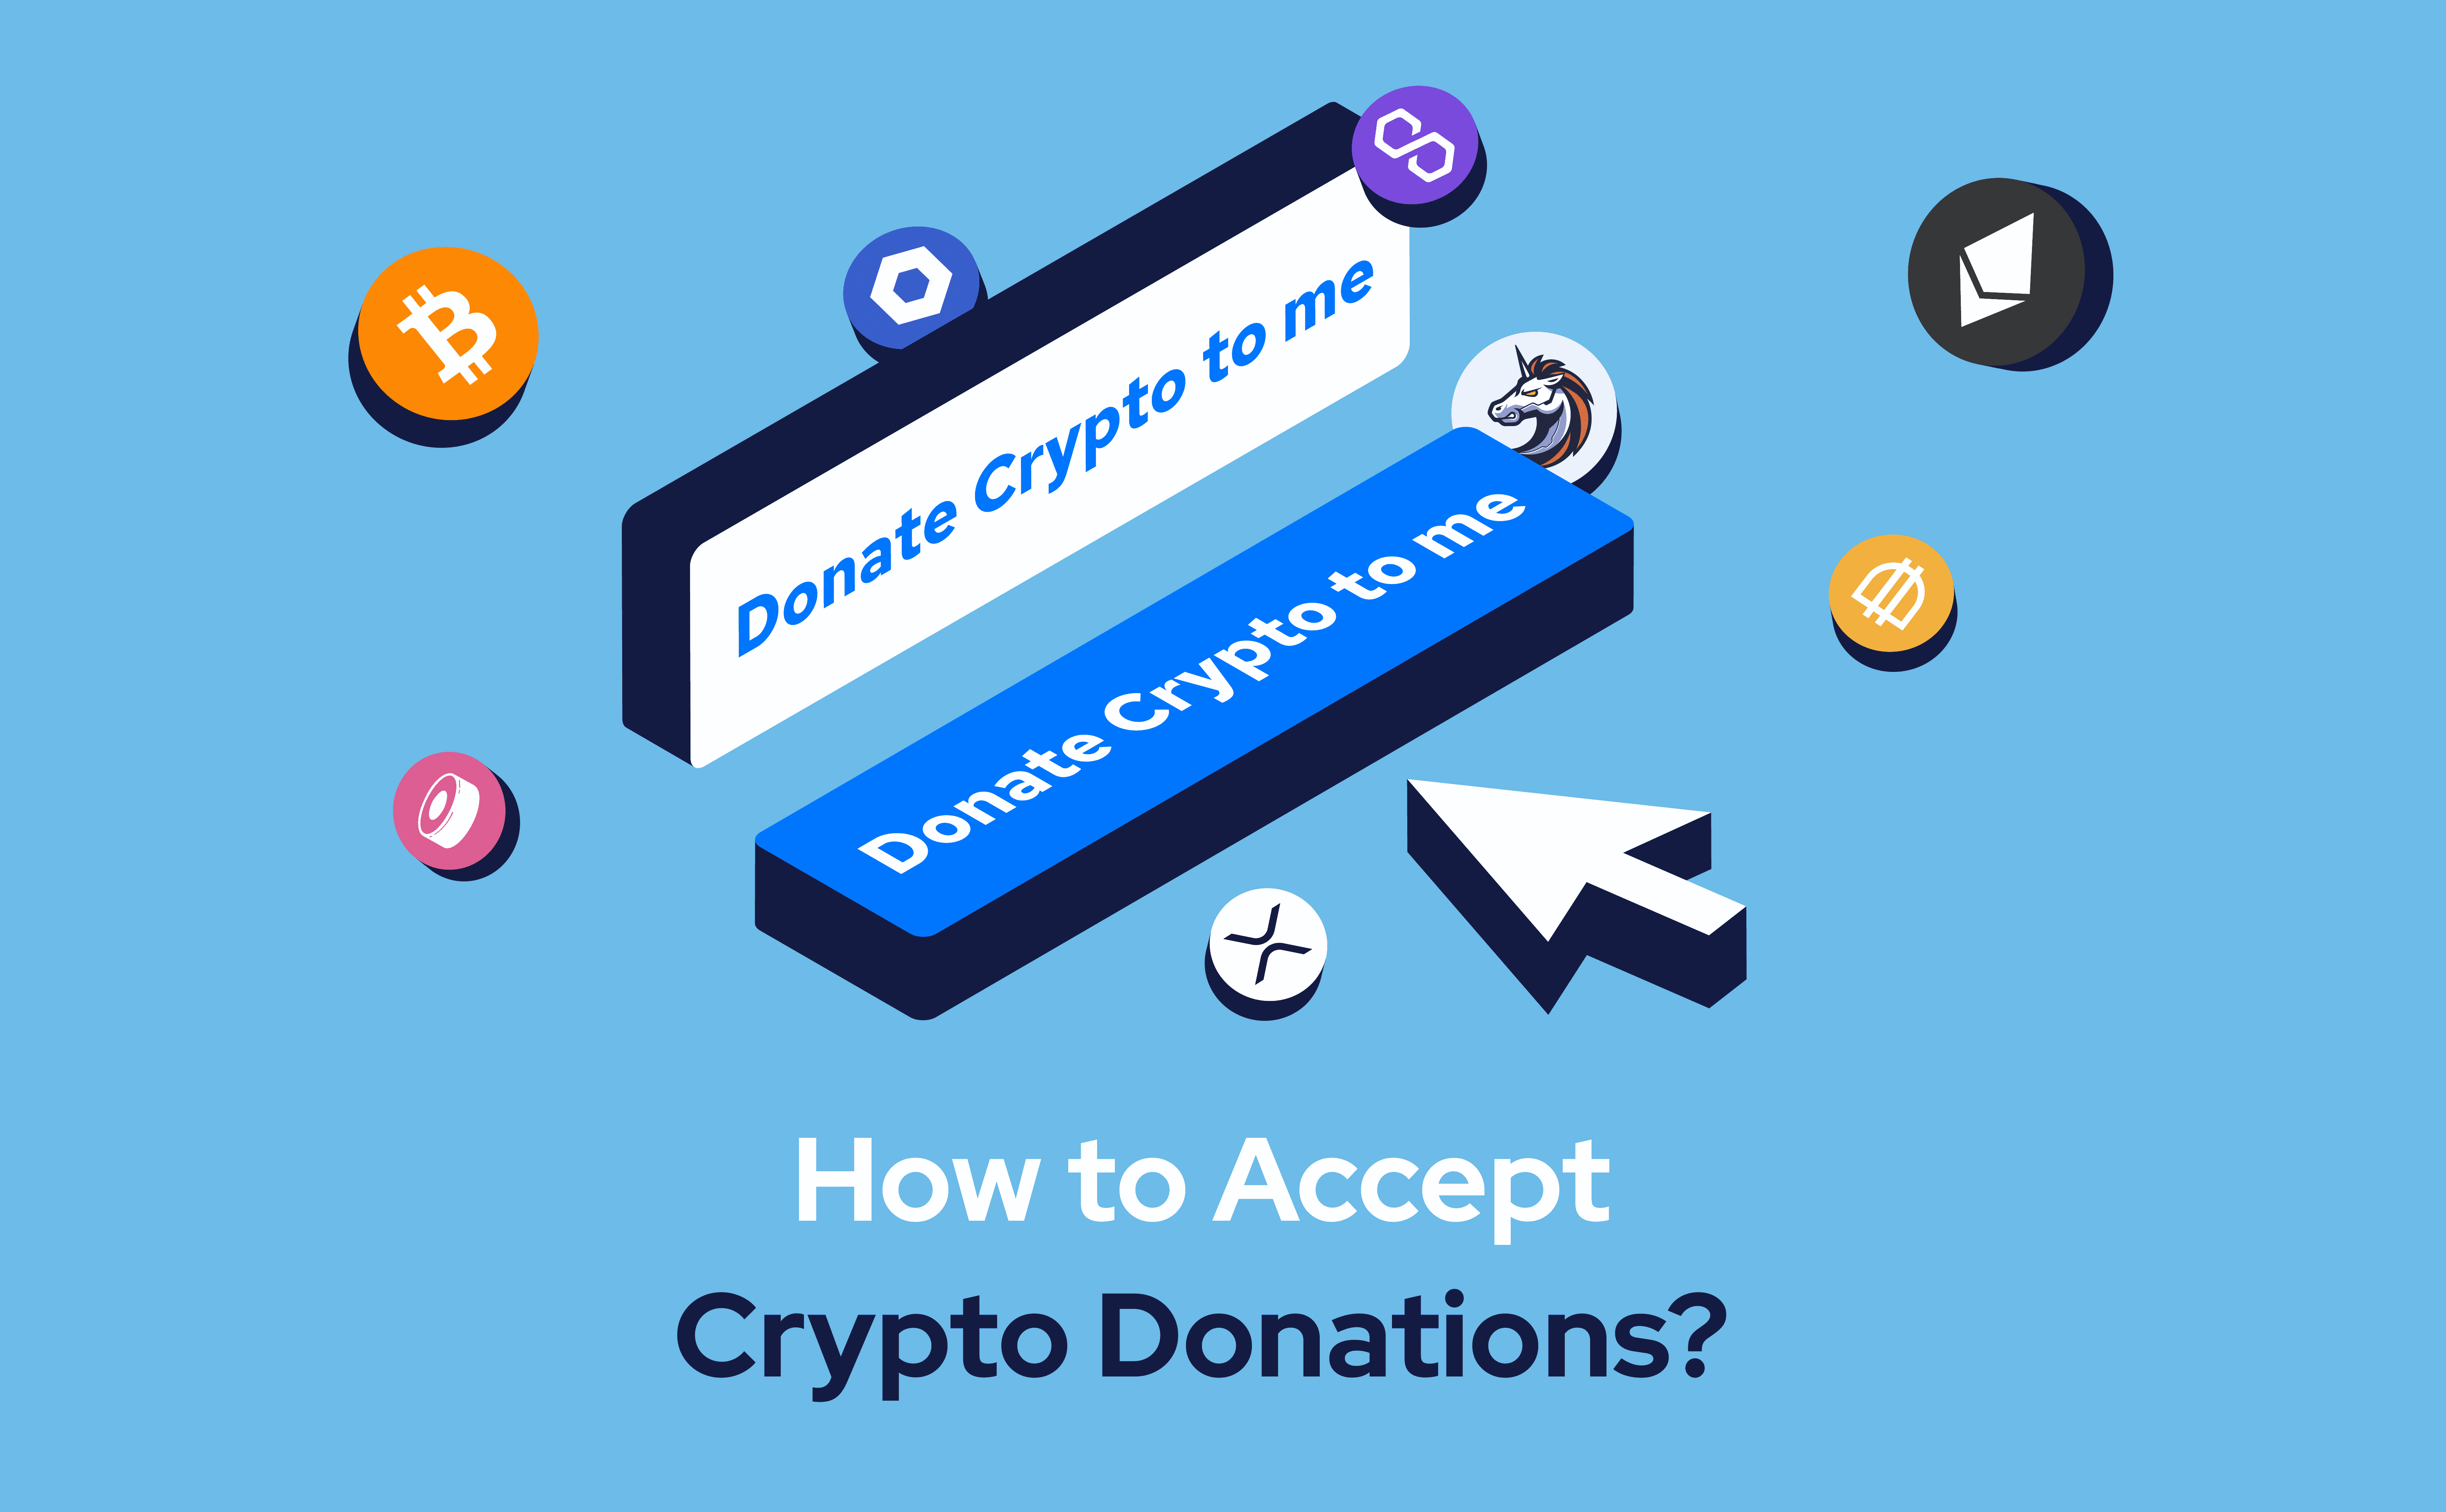 How to Accept Crypto Donations